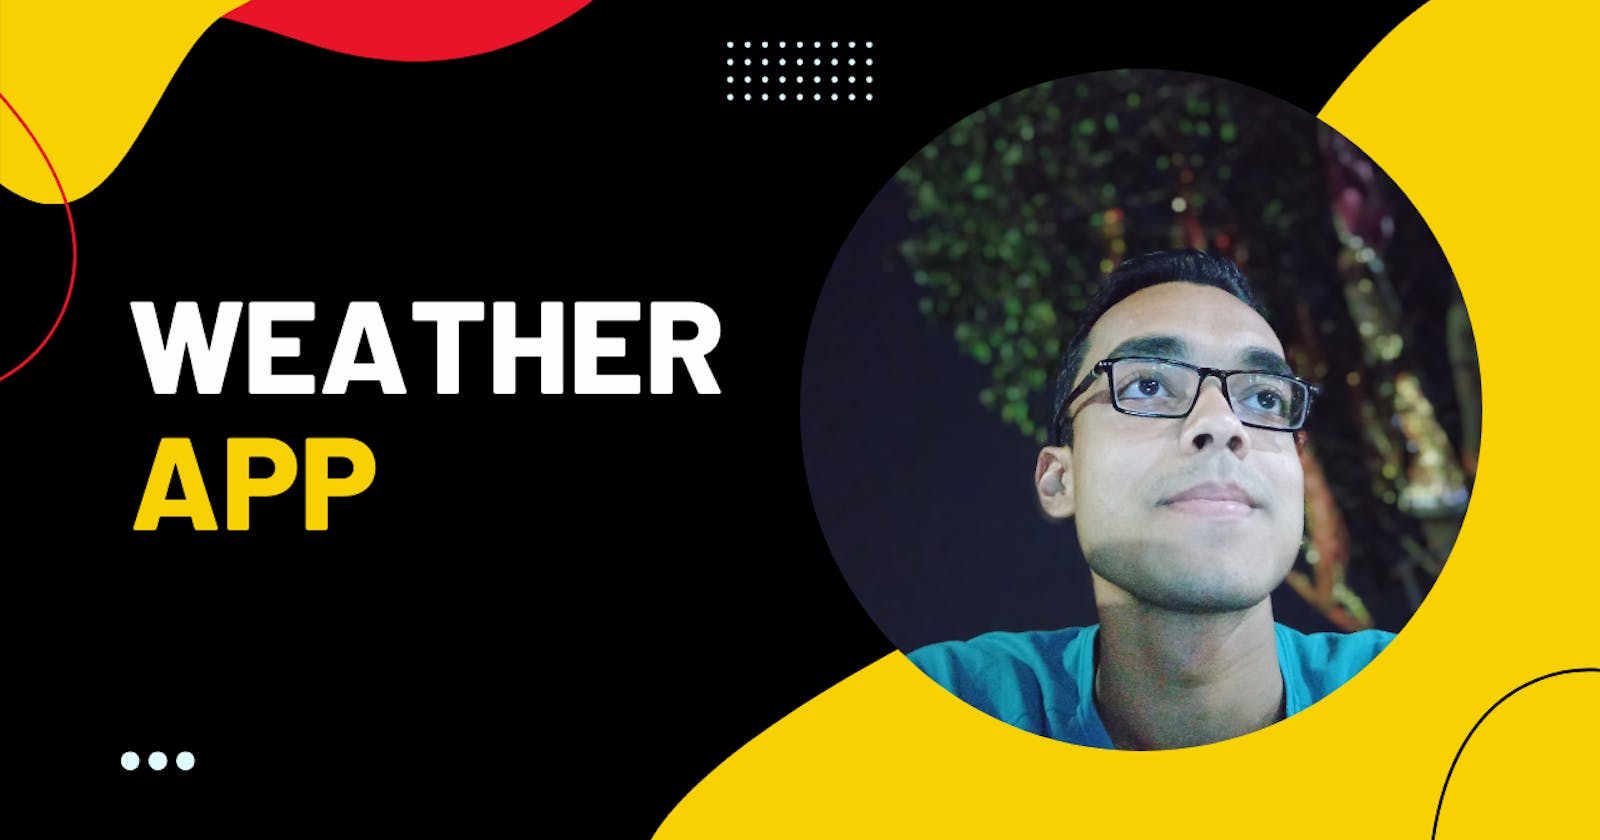 Thought Process Behind Making a React App - Weather App